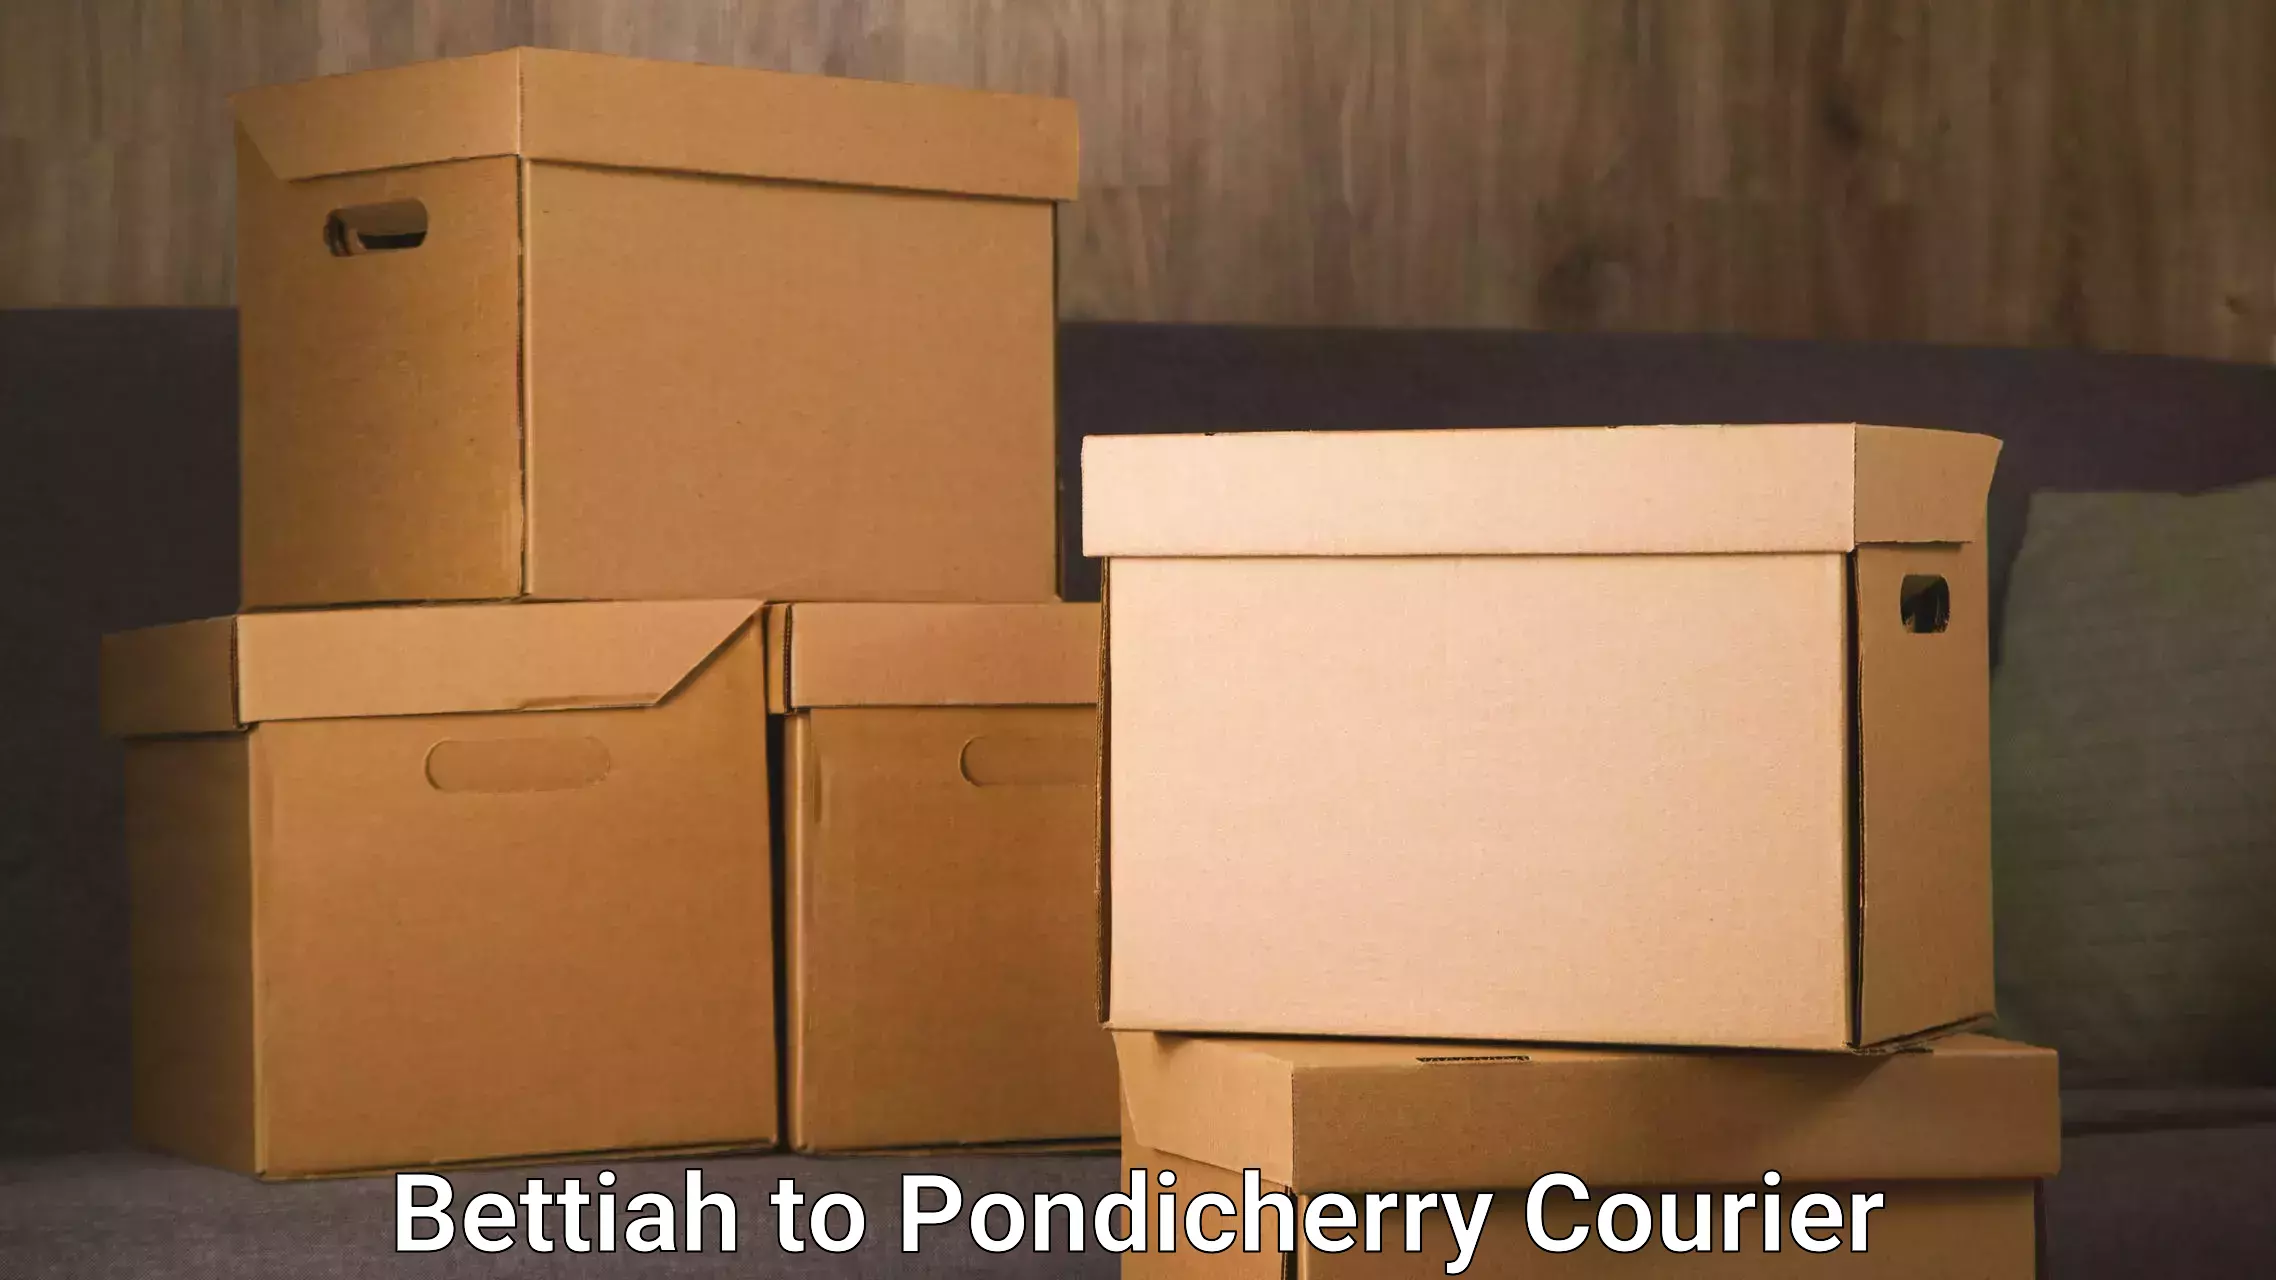 Furniture relocation experts Bettiah to Pondicherry